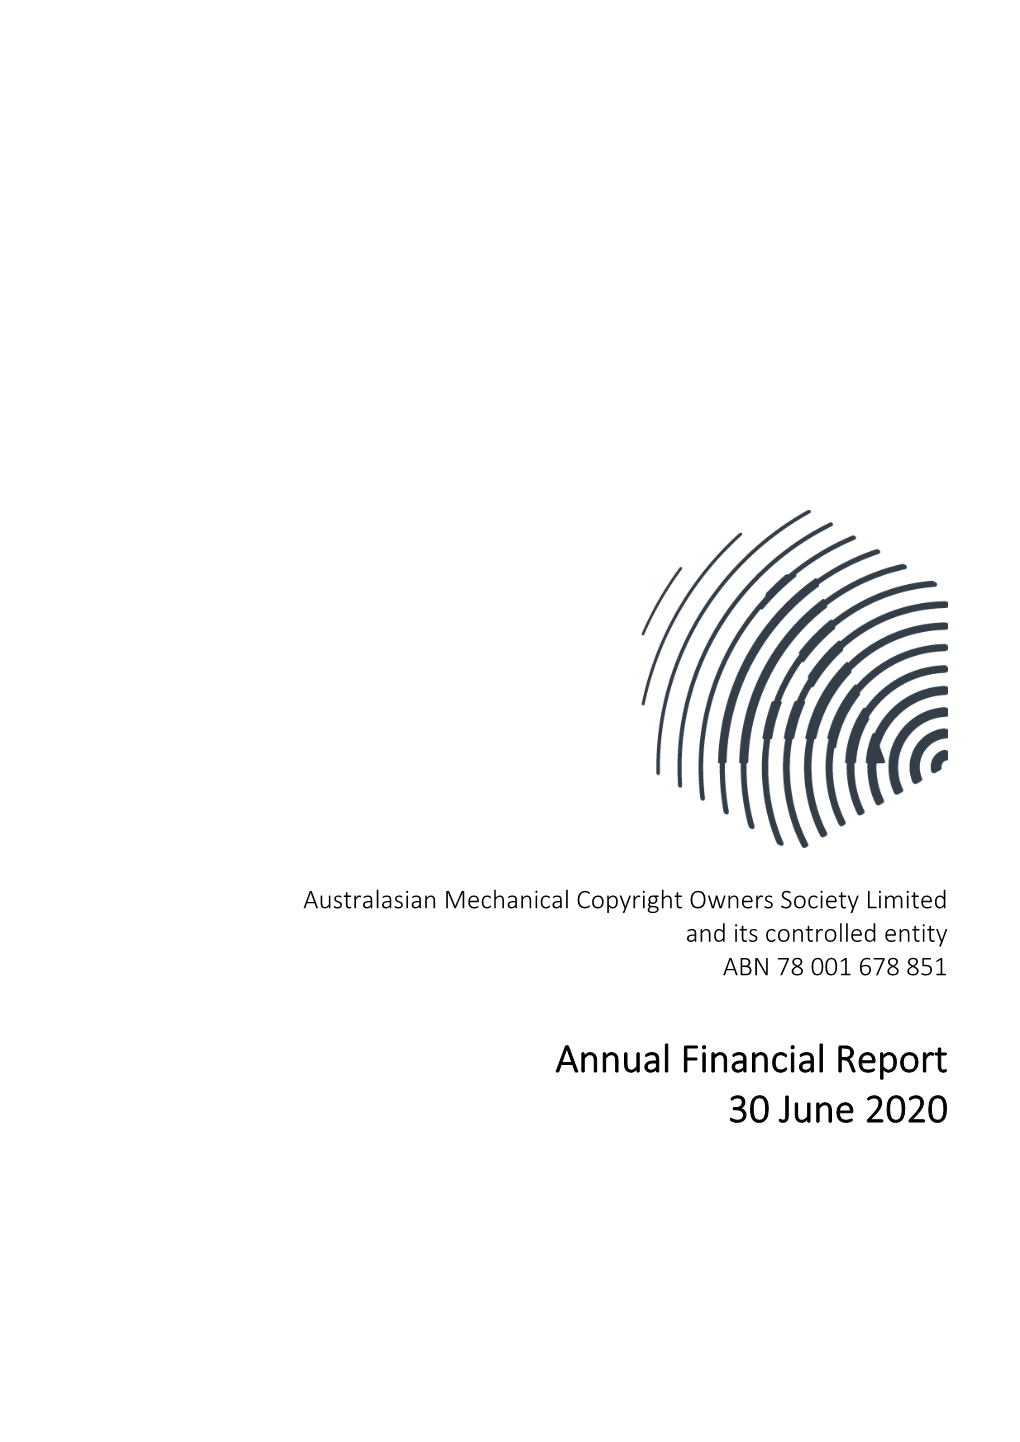 Annual Financial Report 30 June 2020 Australasian Mechanical Copyright Owners Society Limited and Its Controlled Entity Annual Report 30 June 2020